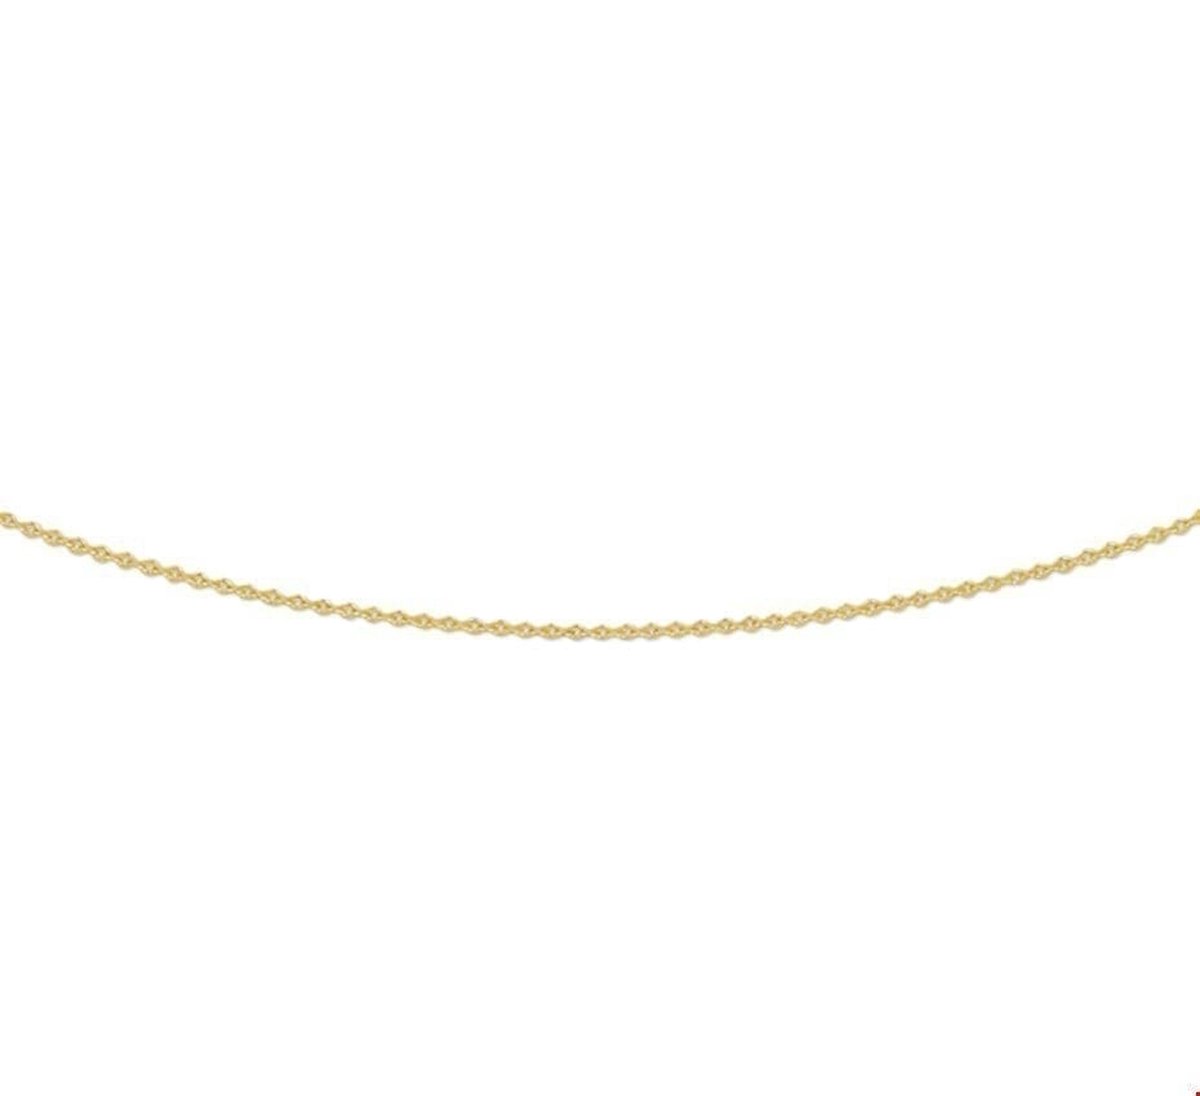 The Jewelry Collection Ketting Anker Plat 0,8 mm 45 cm - Goud - Huiscollectie